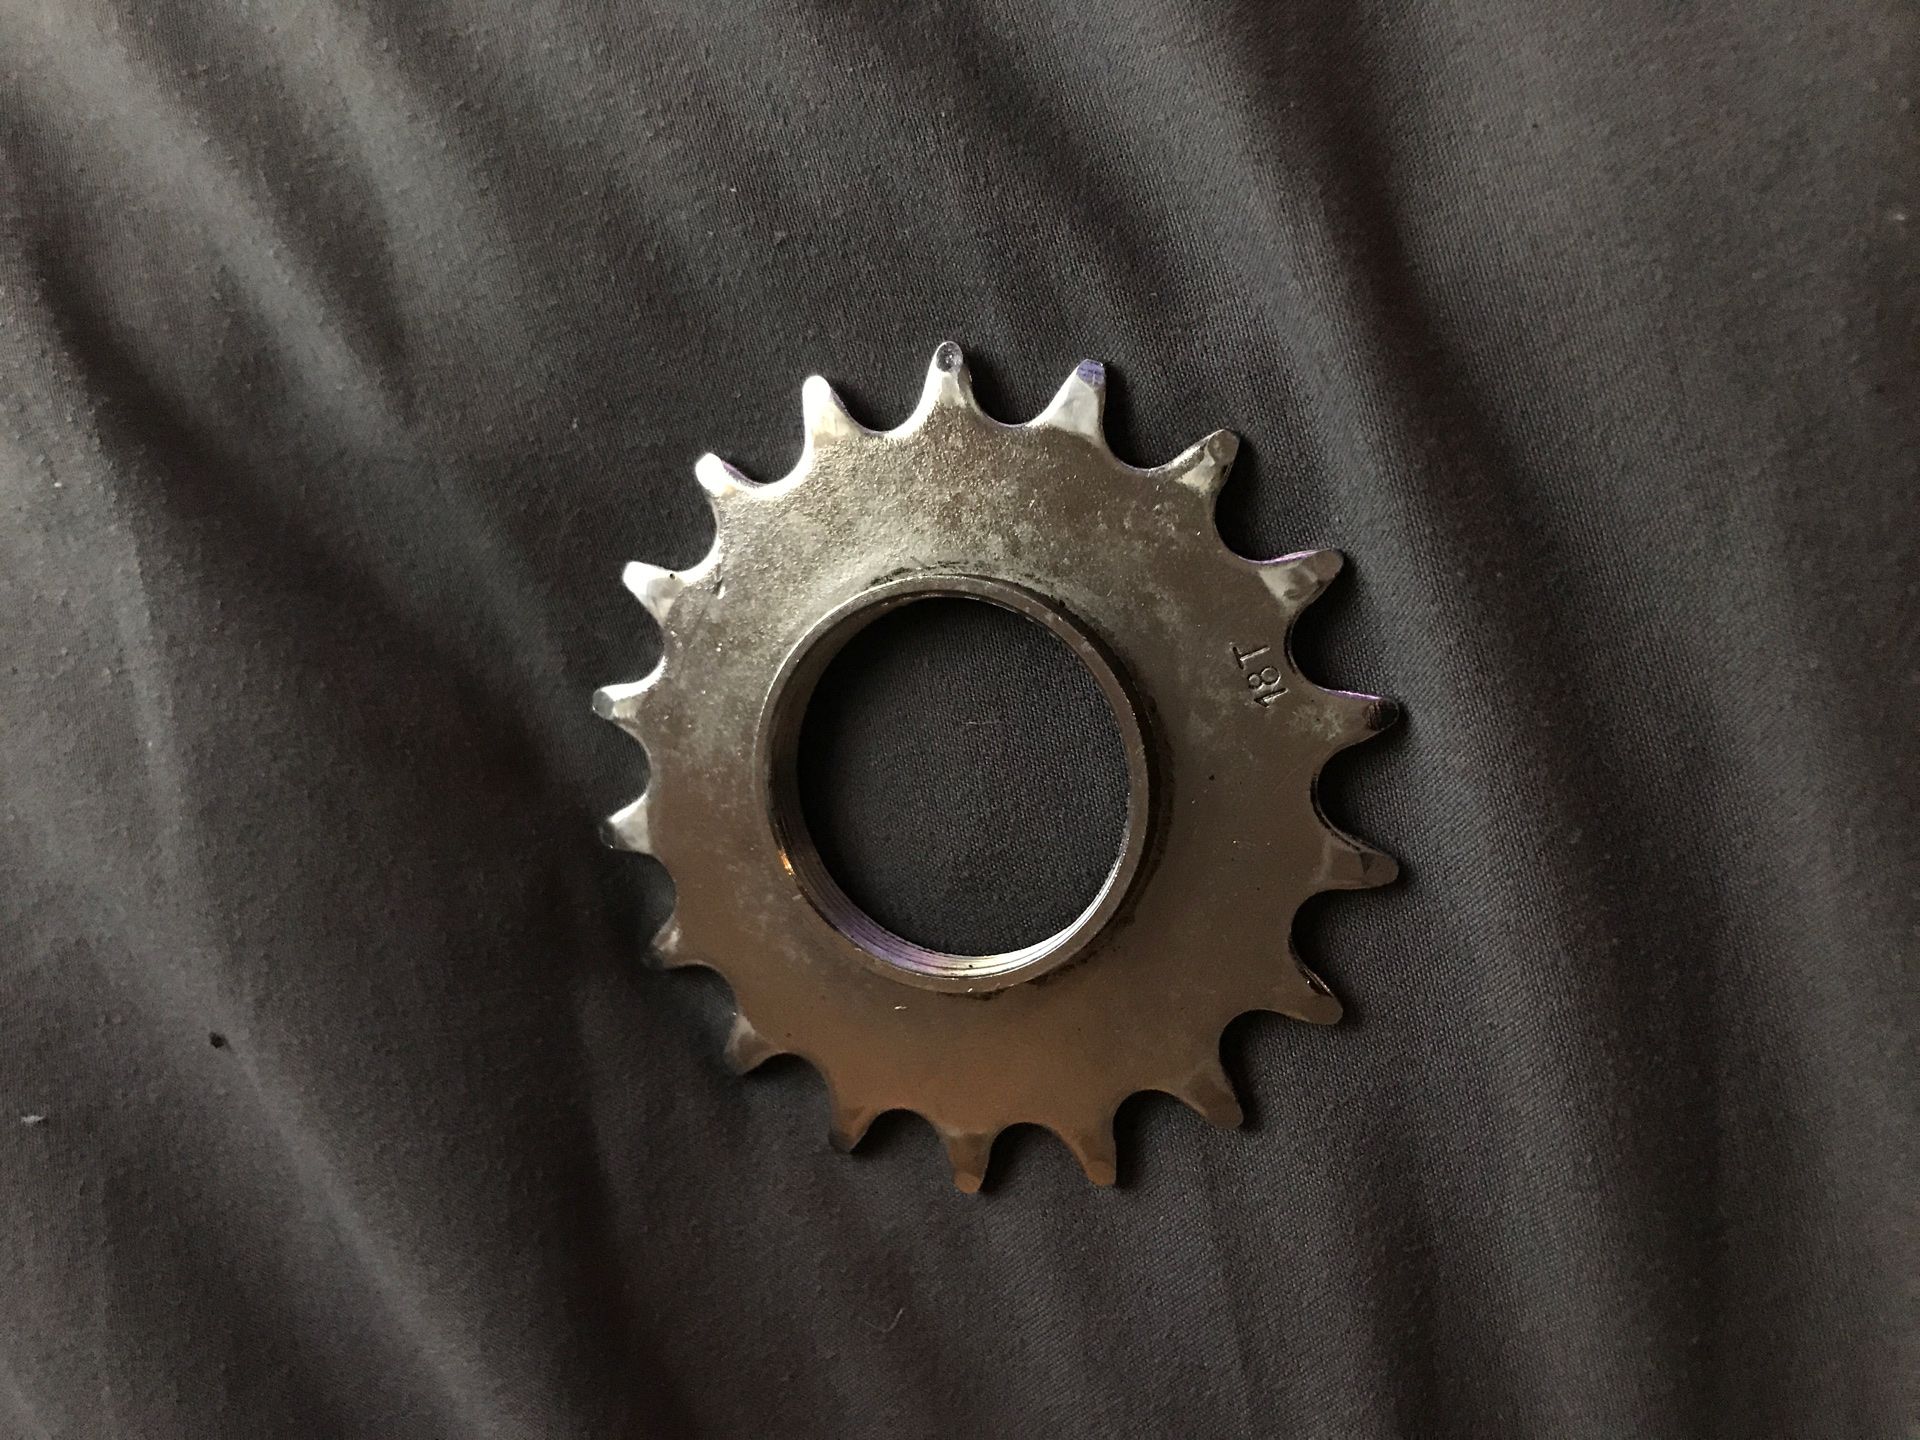 18 tooth gear